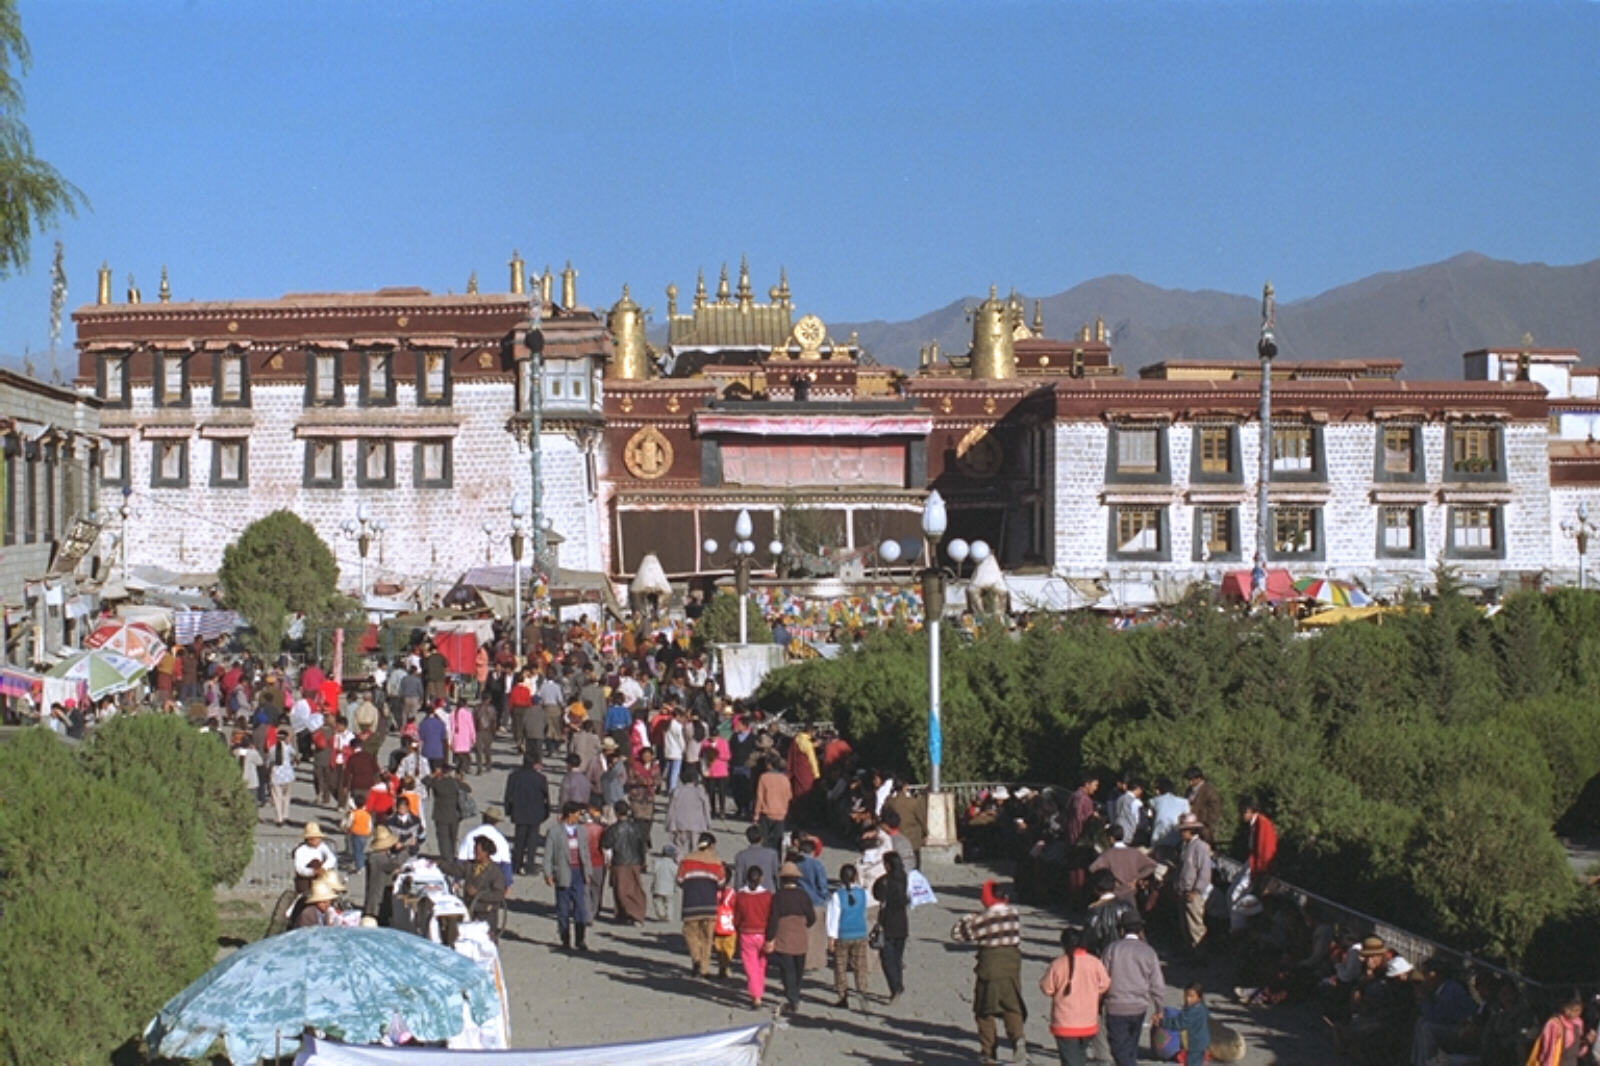 Barkhor Square and the Jokhang in Lhasa Tibet